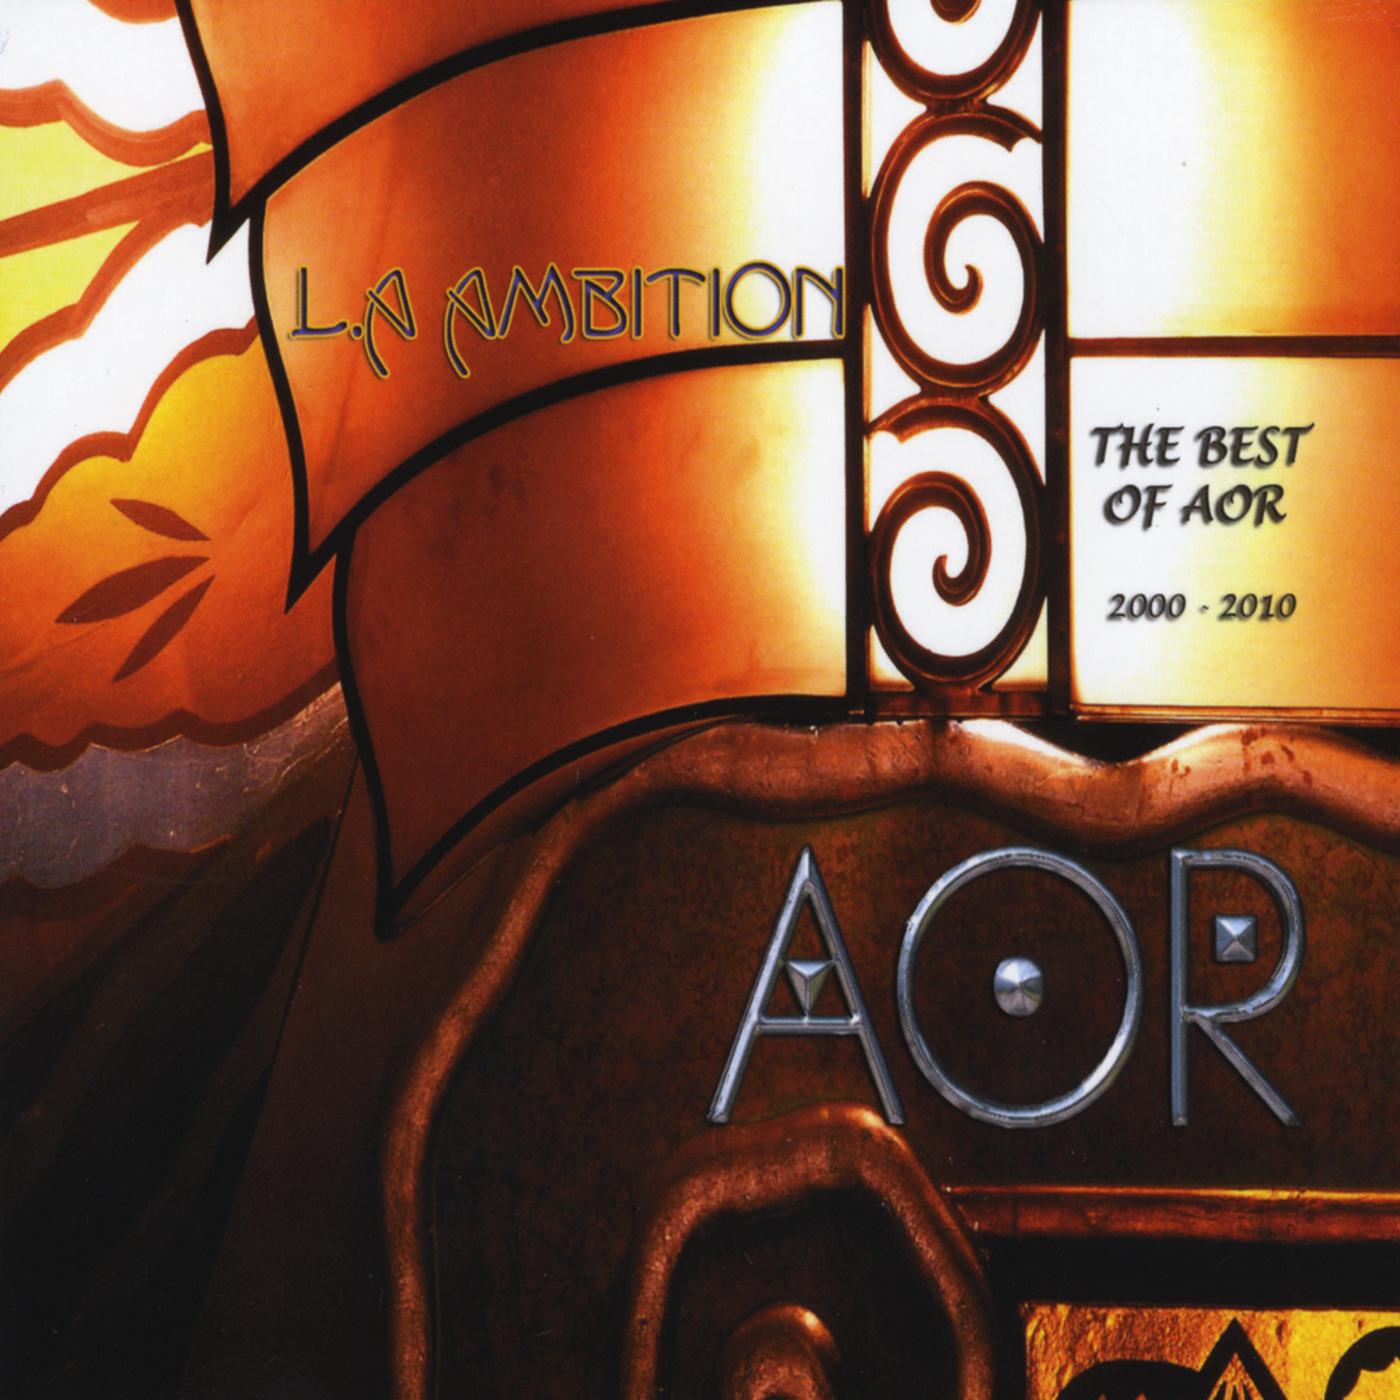 L.A Ambition "The Best Of AOR 2000-2010"